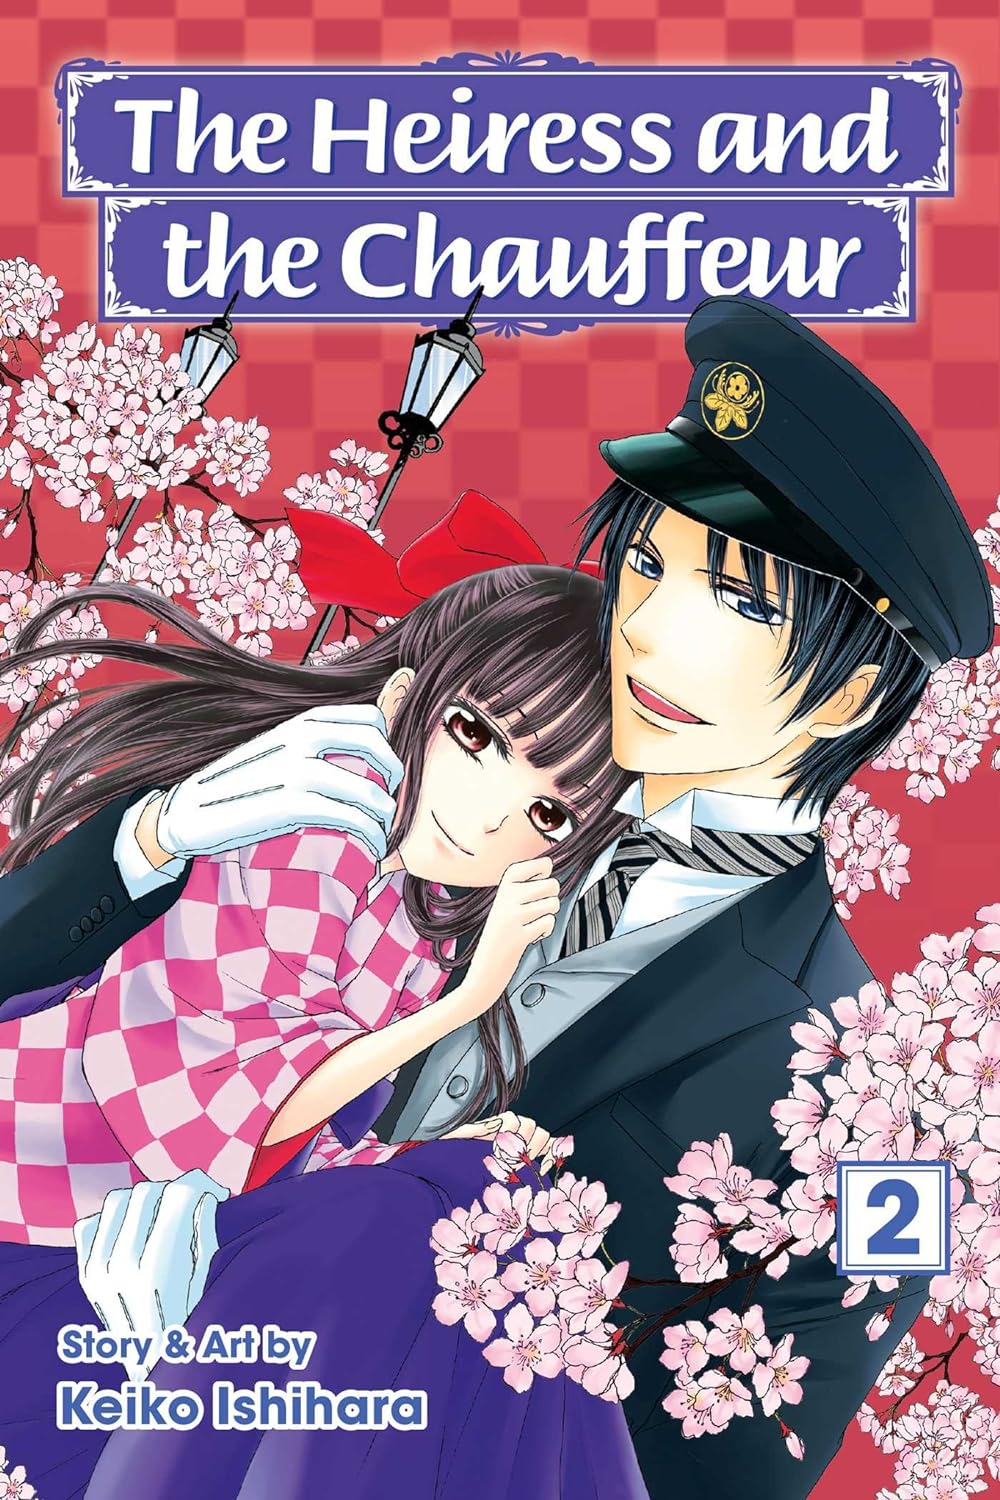 The Heiress and the Chauffeur Vol. 02